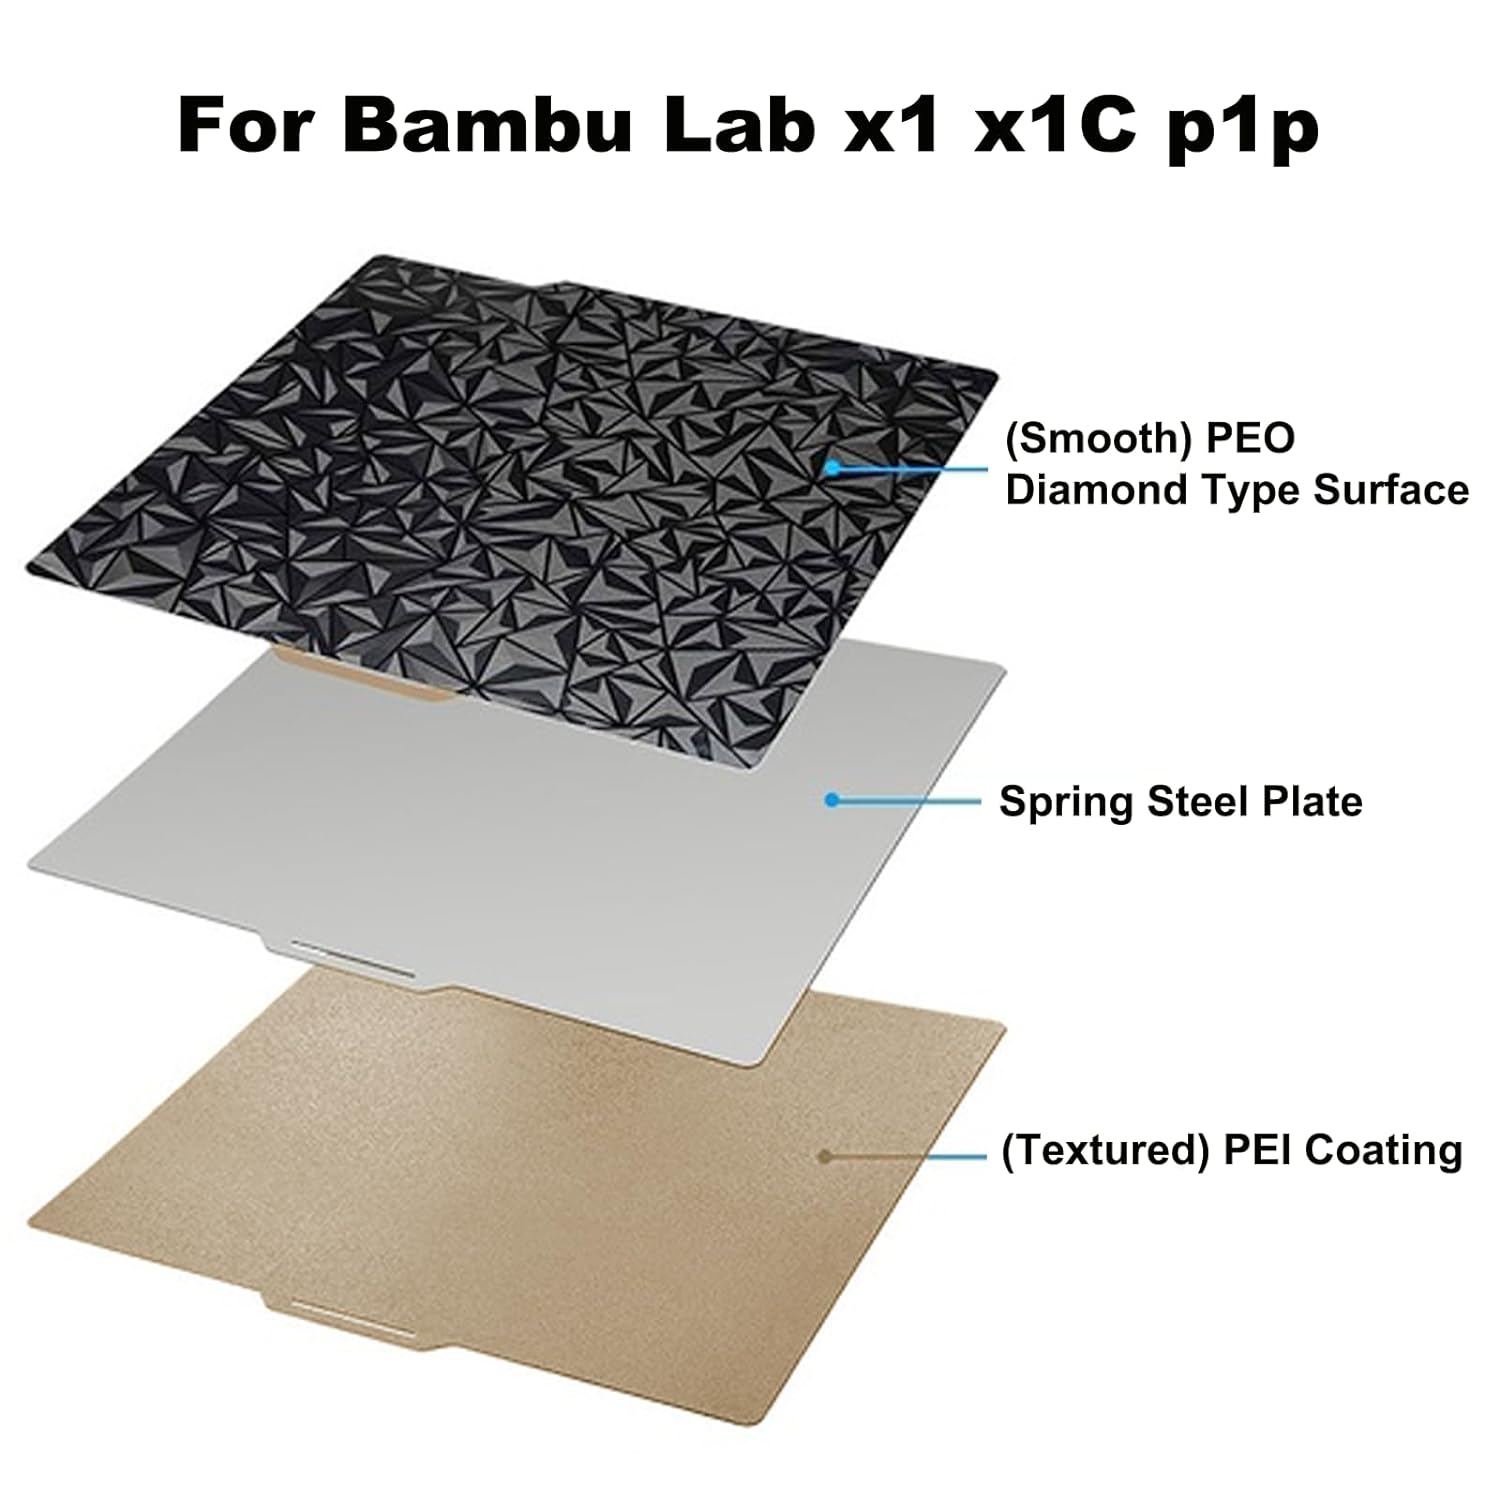 3D Printer Build Plate for Bambu Lab x1 P1P 3D Printer,Upgraded Smooth PEO Surface+Textured PEI Surface 257x257mm Spring Steel Build Plate,PEO+PEI Double Sided Flexible Sheet Removable Platform Mat